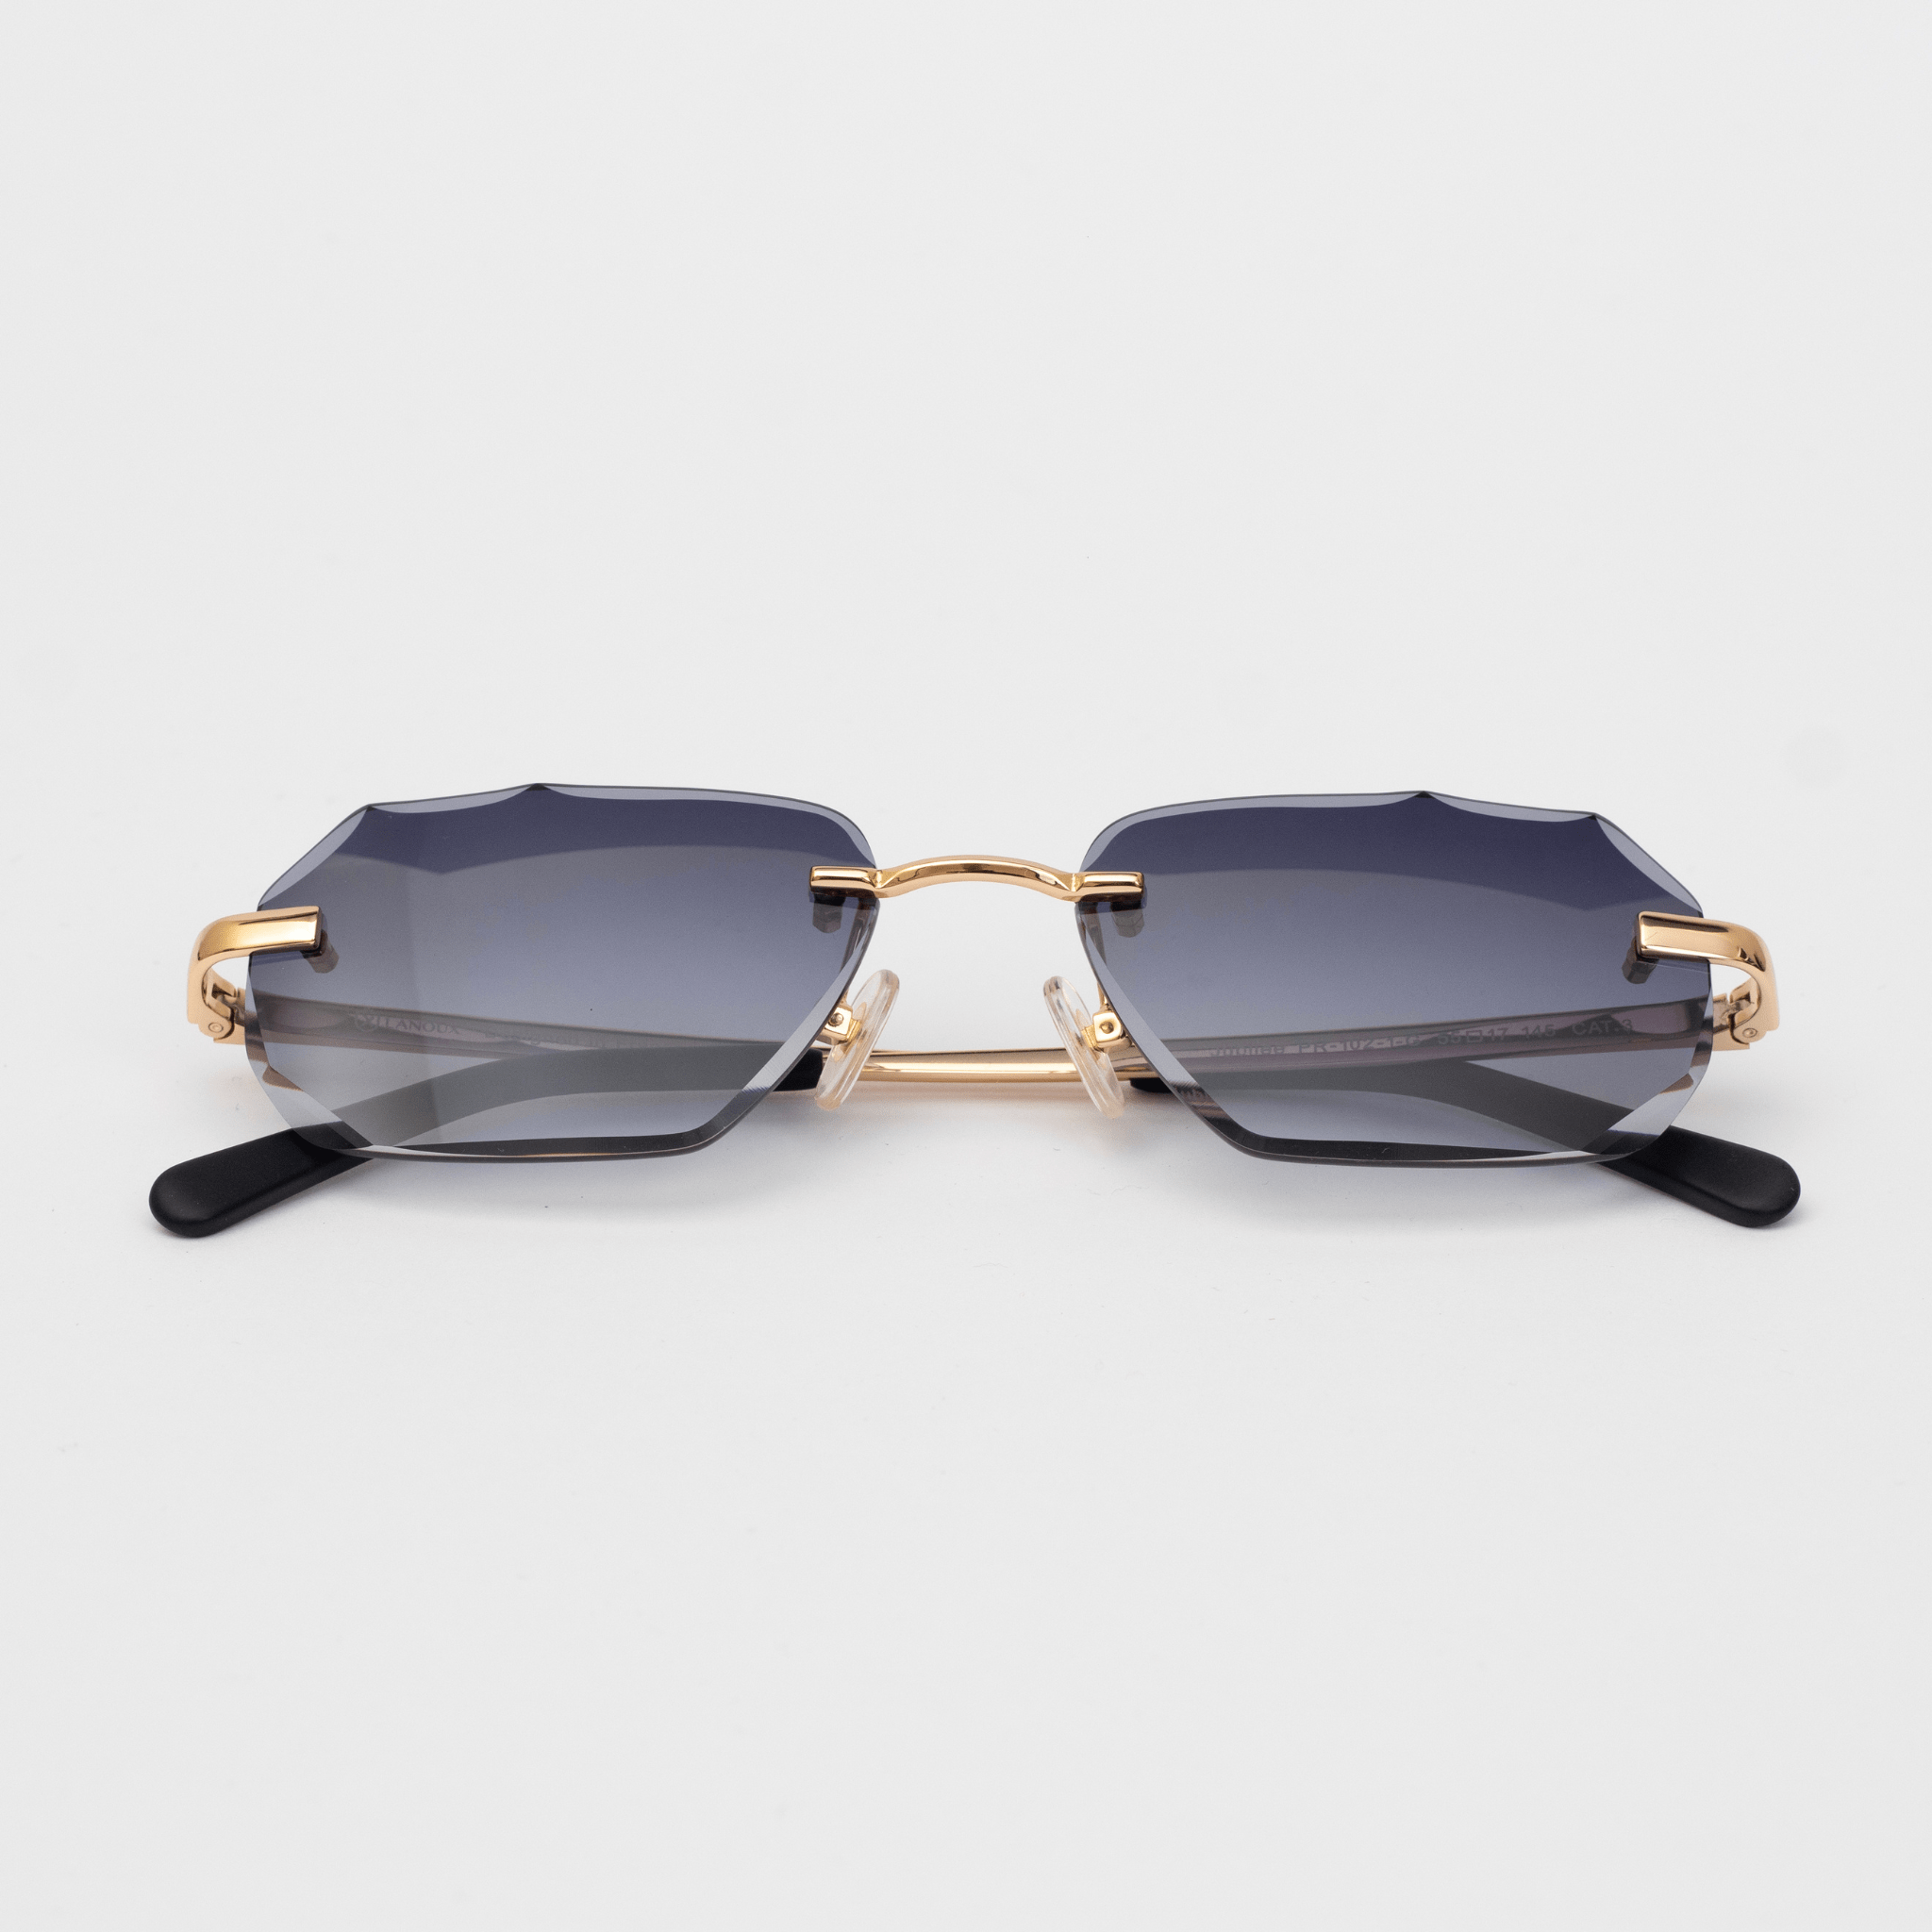 Model Jubilee diamond-cut sunglasses featuring a unique faceted grey lens design, with 18K gold-plated accents on the frame and hinges, presented on a white background.